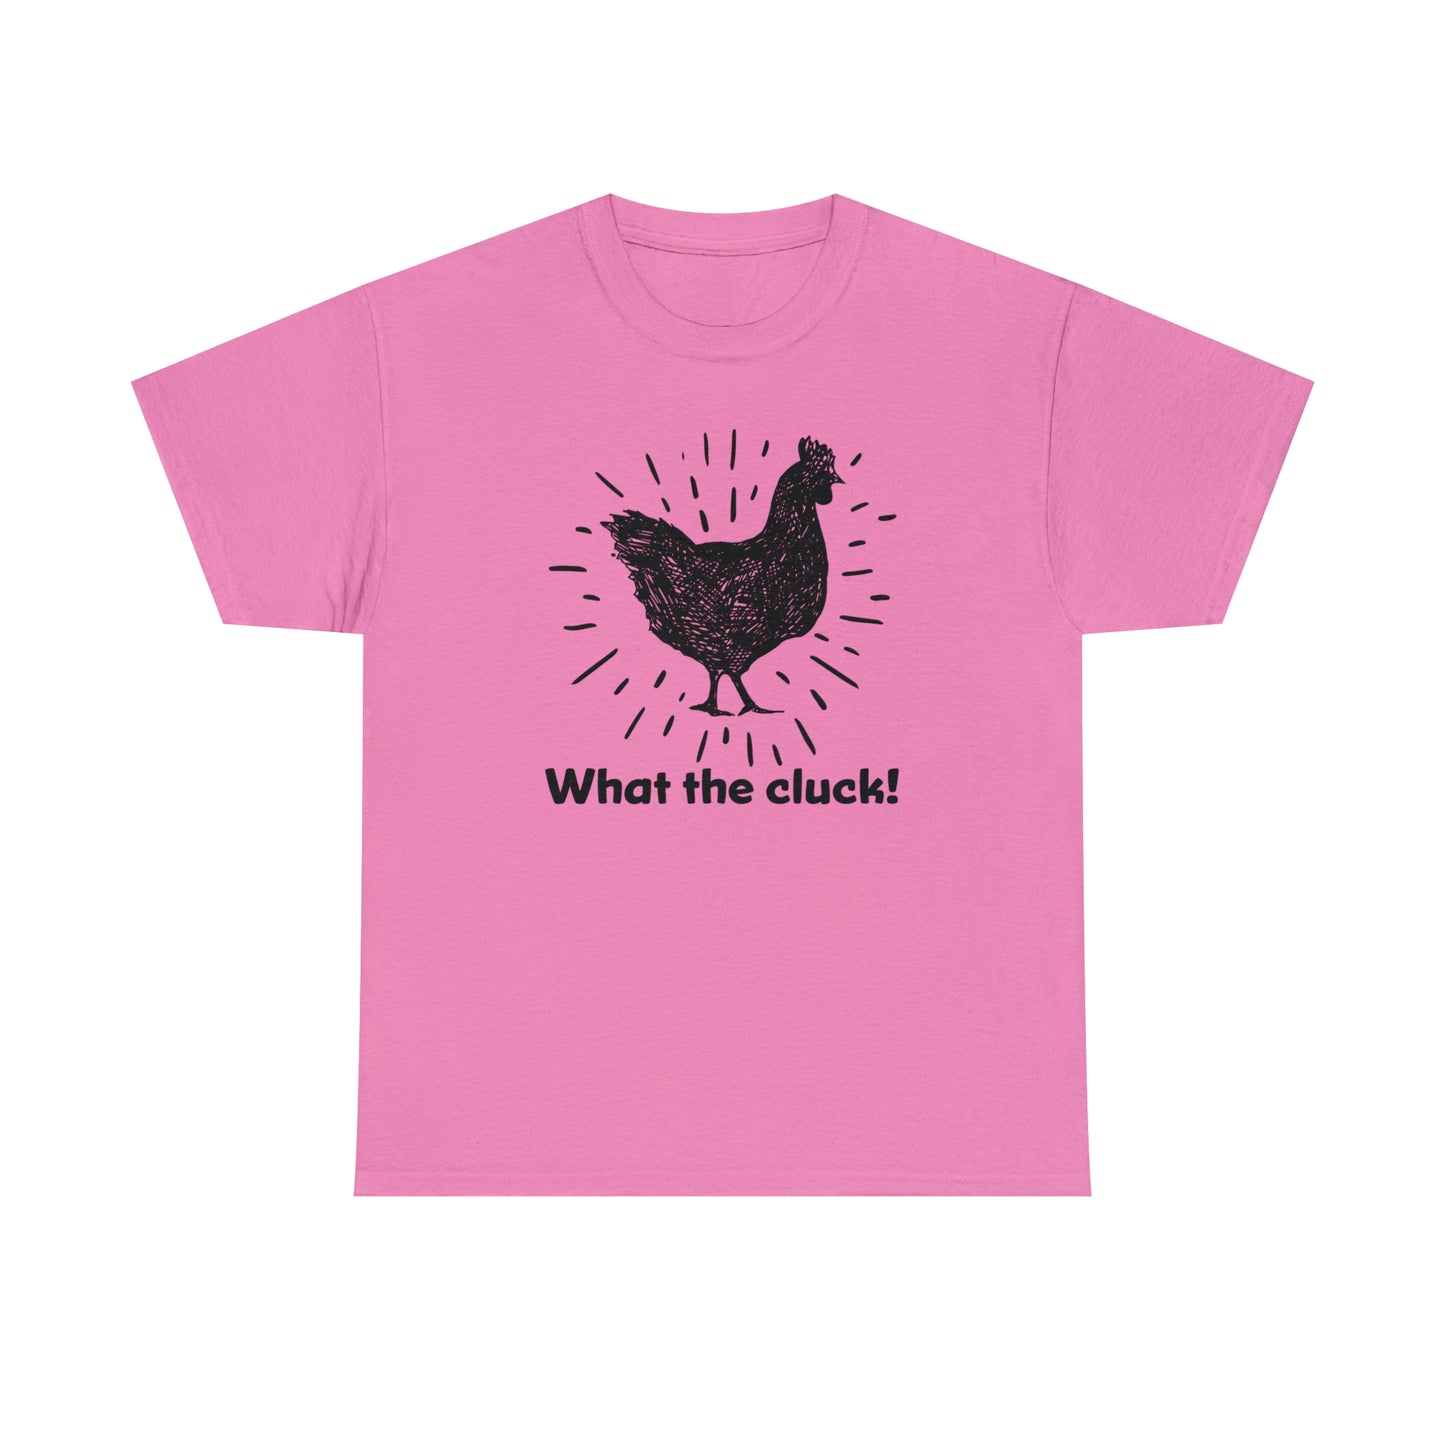 Funny Chicken T-Shirt For What The Cluck TShirt For Hen T Shirt For Farm Girl Shirt For Women T-Shirt For Chicken Owner Tee For Fun Chicken Gift